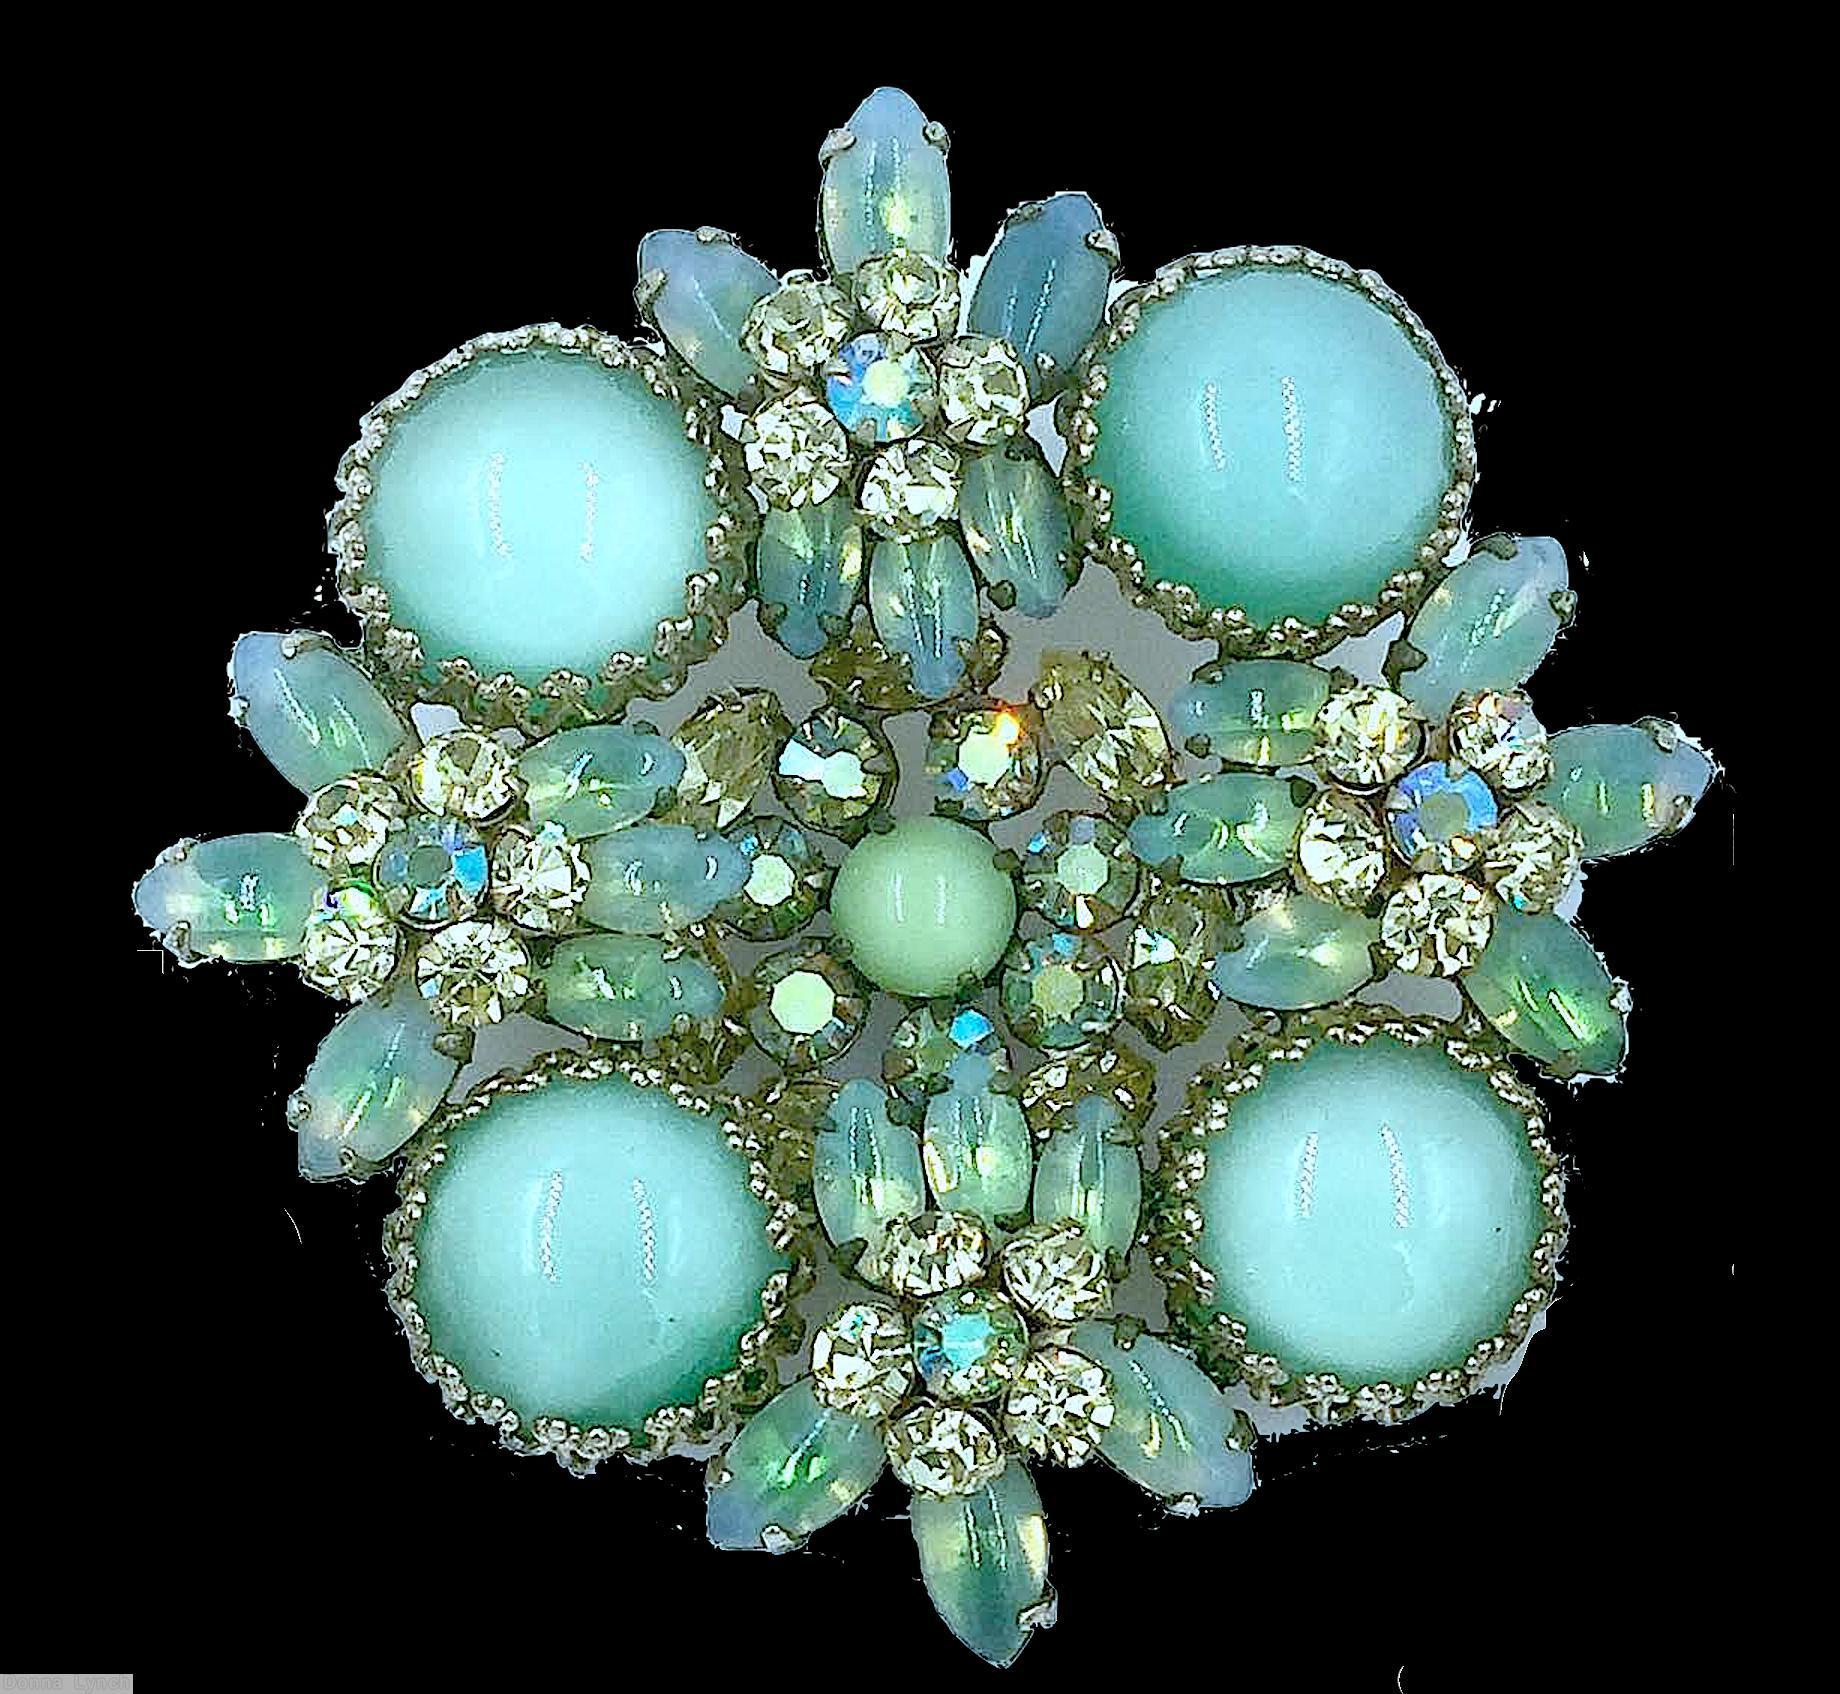 Schreiner square radial pin 4 large chaton corner 4 clustered flower small chaton center pale blud moonglow bicolor blue white navette ab chaton crystal chaton jewelry